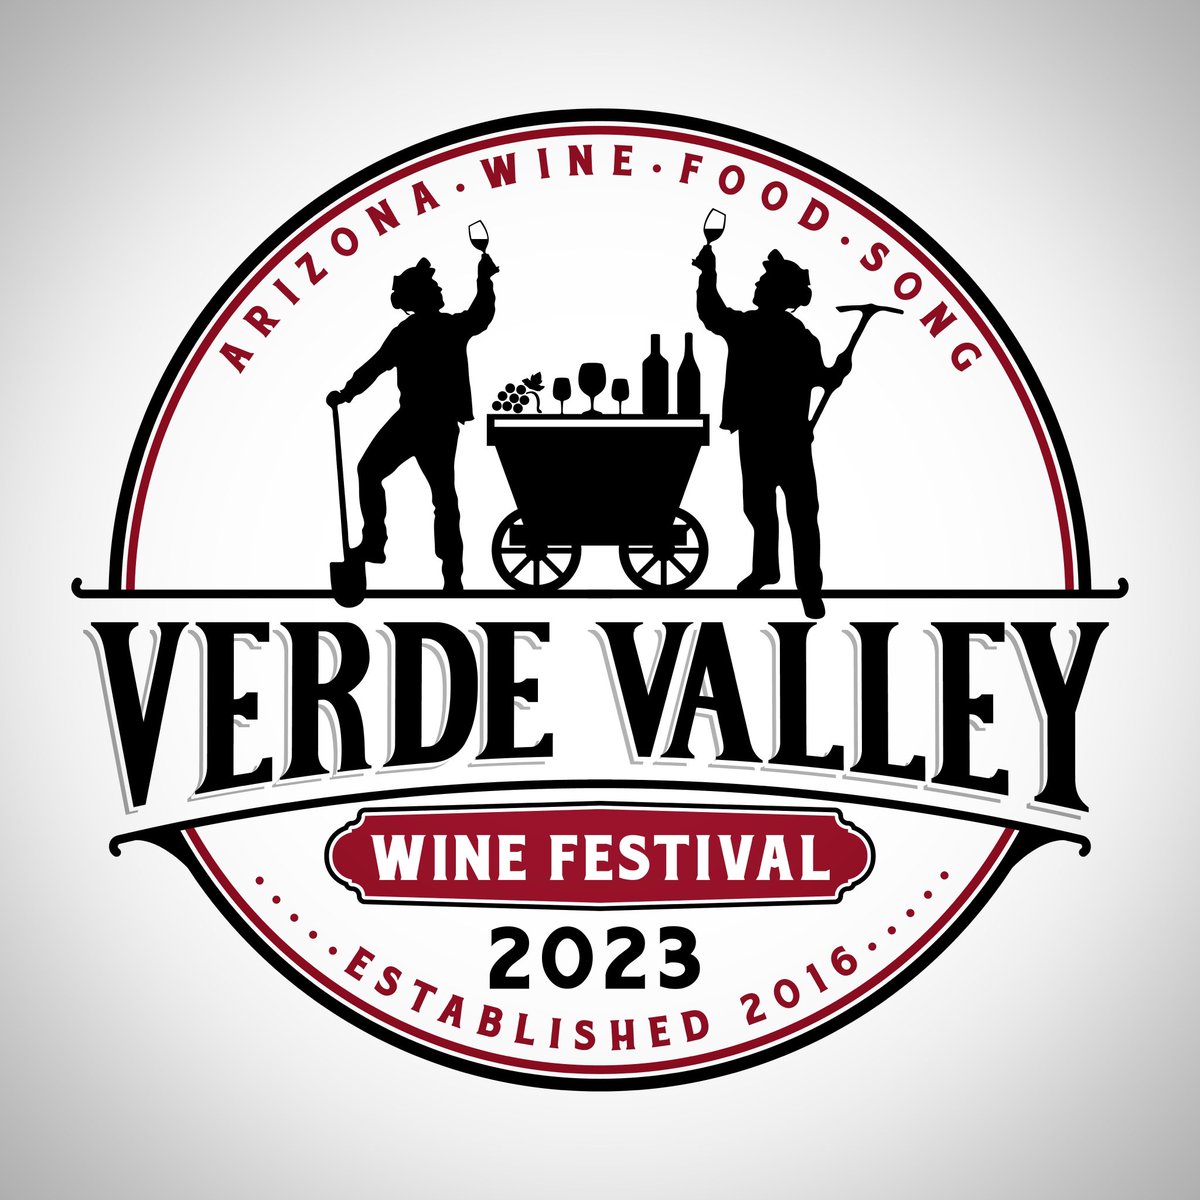 Gettin better every year. More space, shade, & fun! 22 AZ wineries, 2 breweries, distillery, food trucks & vendors including Puscifer (The Store), Barbifer, & @VerdeValleyBJJ Save time & $ by getting your tickets now. This Sat. 5/20 Riverfront Park, Cottonwood. Link in my bio.